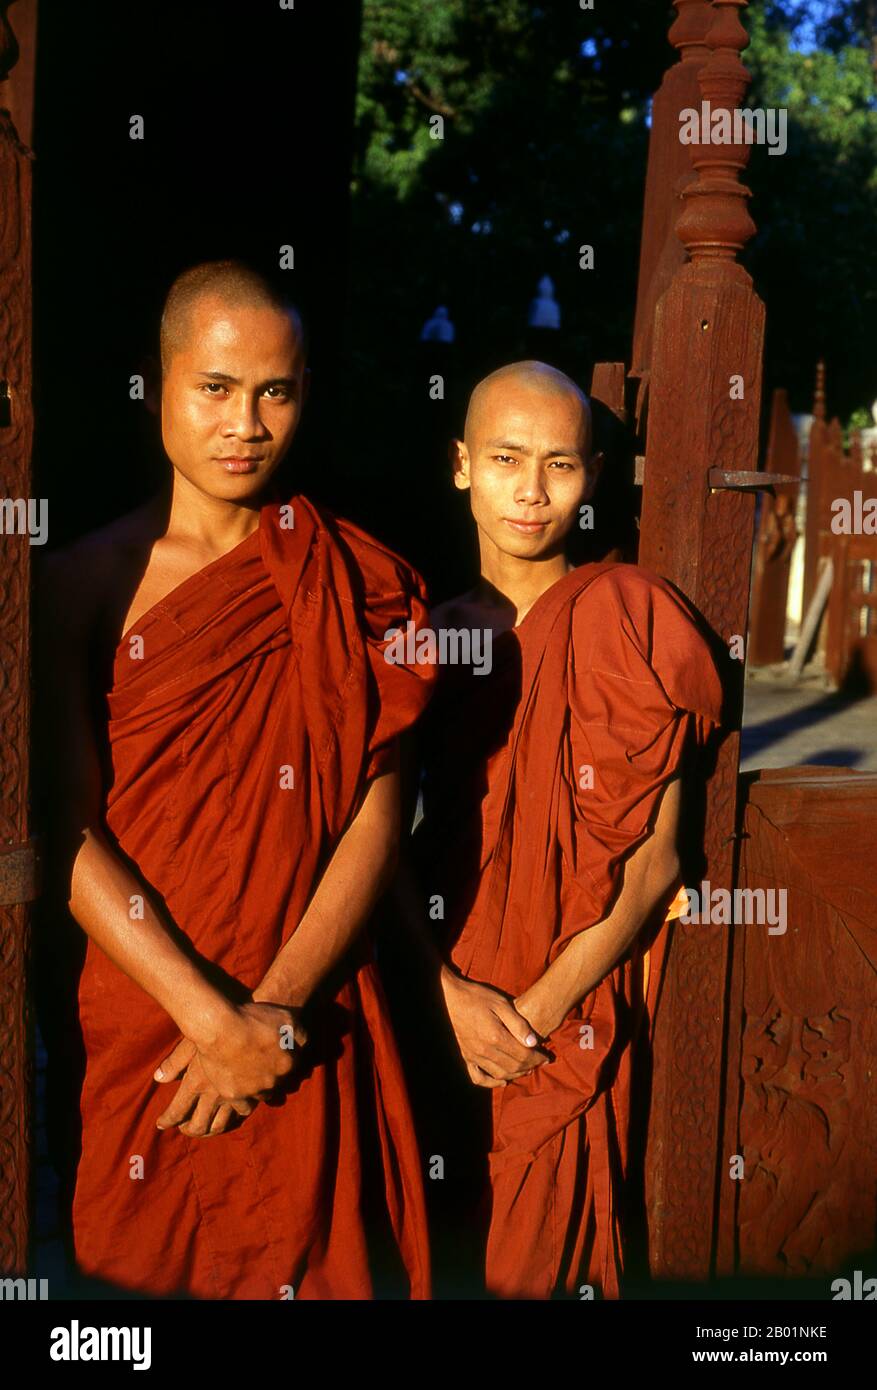 Burma/Myanmar: Two young monks at Shwe In Bin Kyaung (temple), Mandalay.  Mandalay, a sprawling city of more than 1 million people, was founded in 1857 by King Mindon to coincide with an ancient Buddhist prophecy. It was believed that Gautama Buddha visited the sacred mount of Mandalay Hill with his disciple Ananda, and proclaimed that on the 2,400th anniversary of his death, a metropolis of Buddhist teaching would be founded at the foot of the hill. Stock Photo